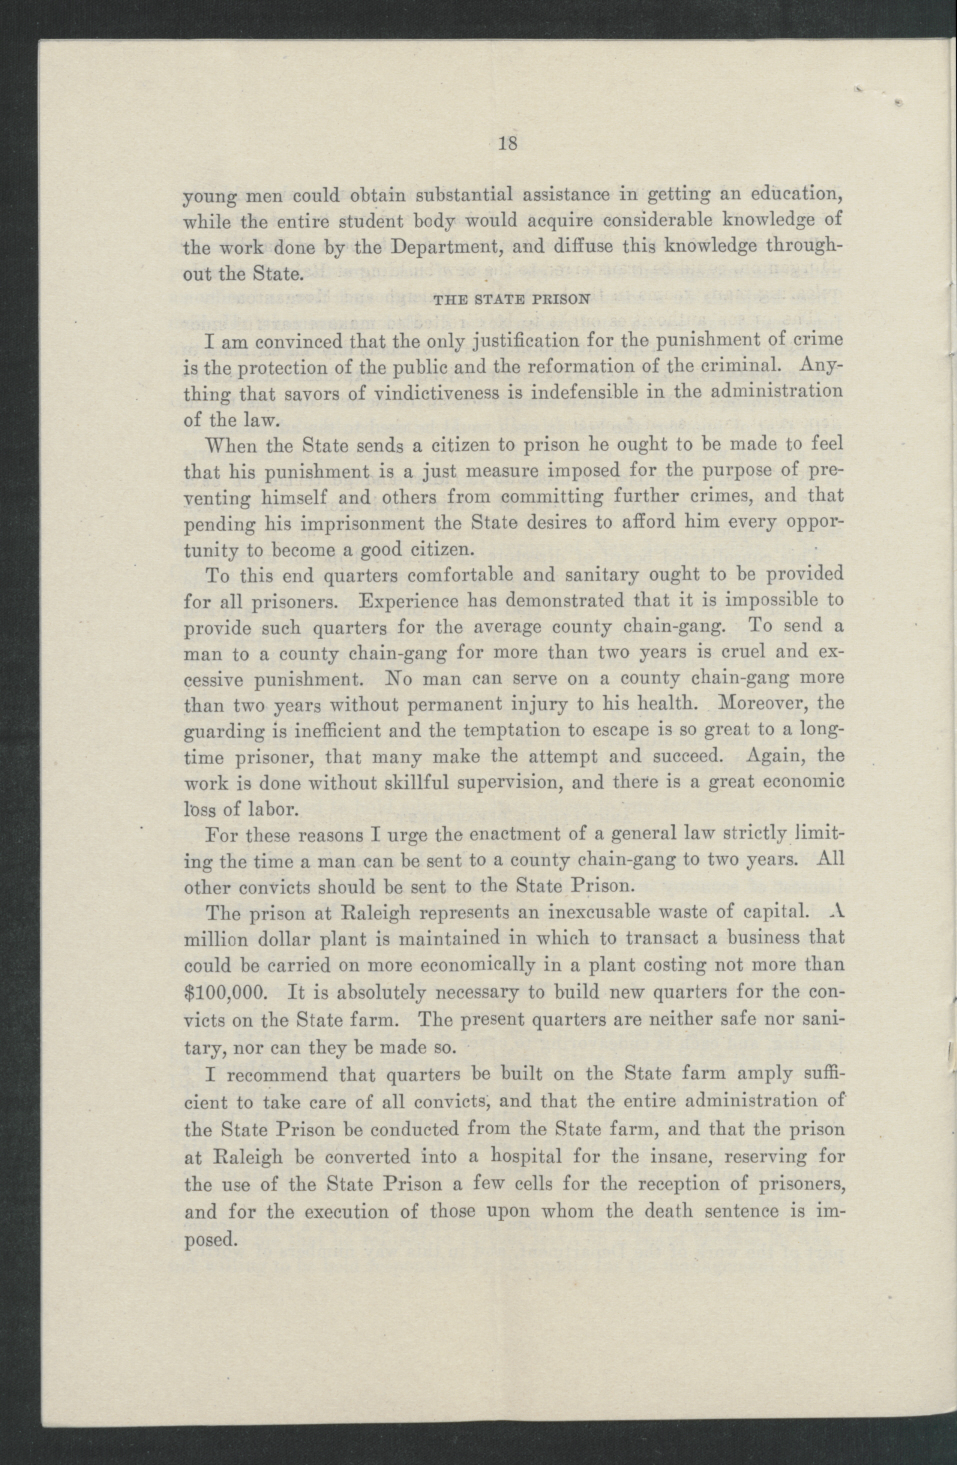 Inaugural Address of Governor Thomas W. Bickett to the General Assembly, January 11, 1917, page 16